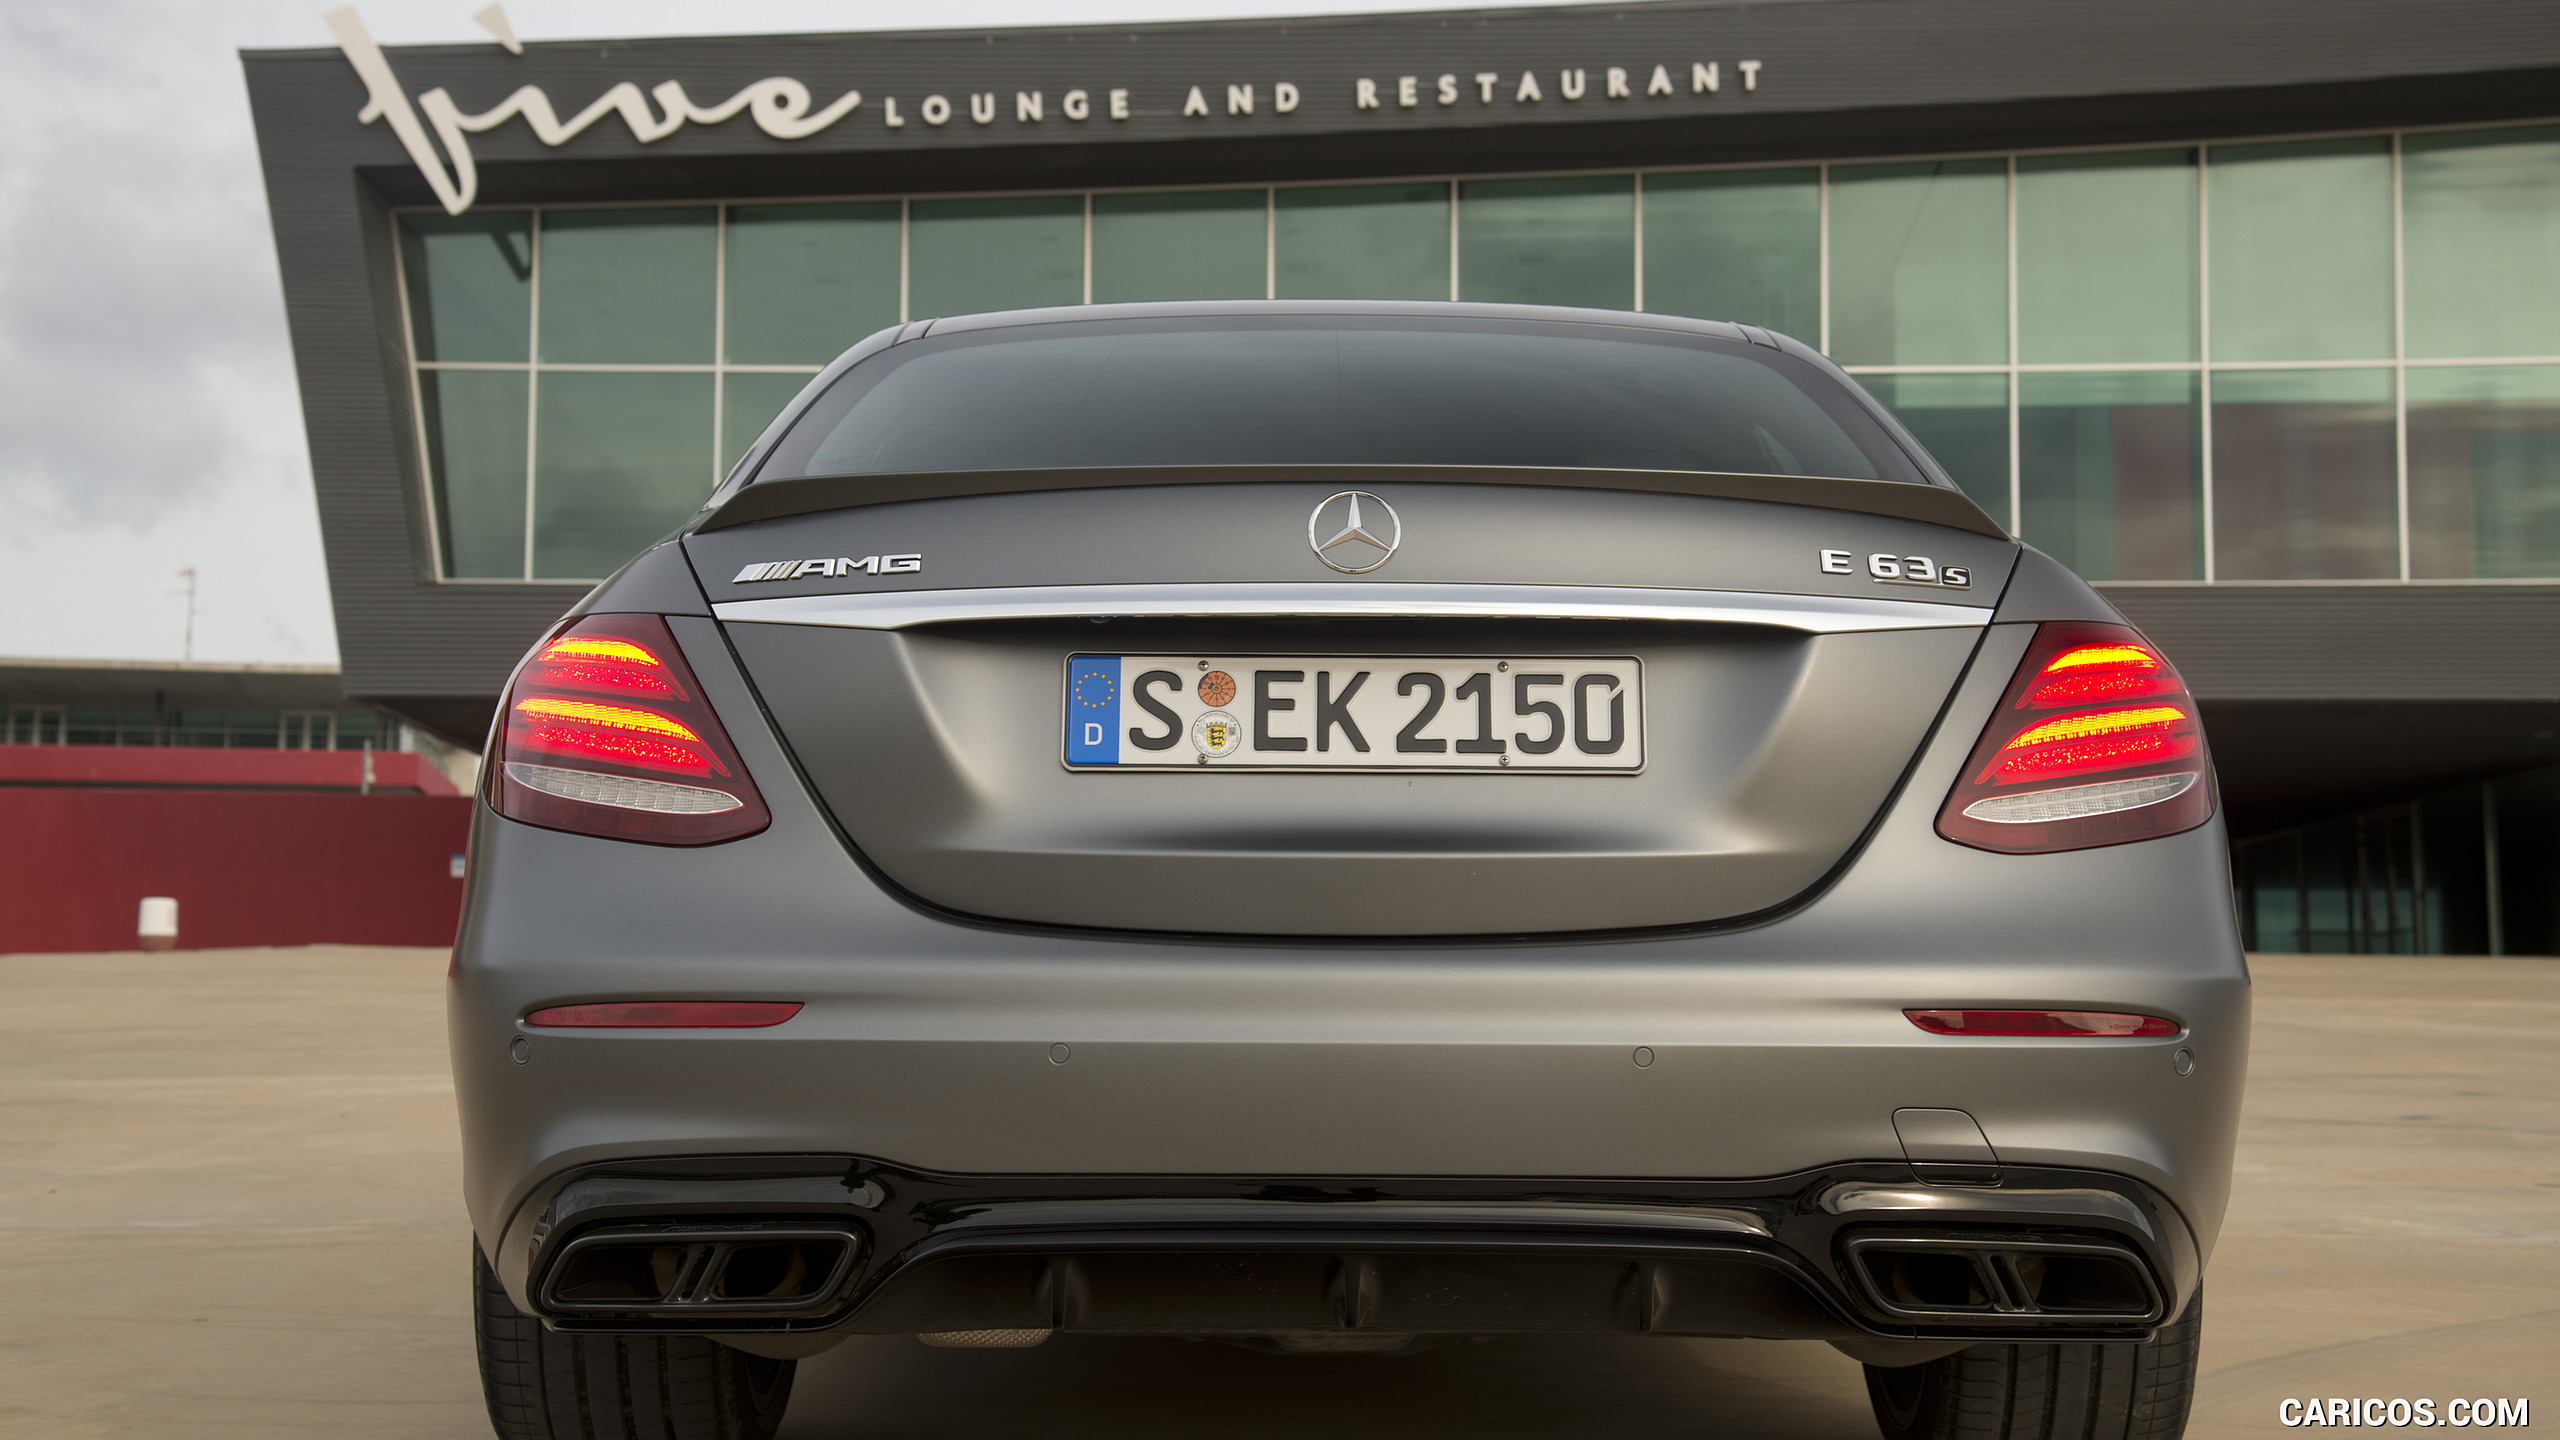 2018 Mercedes-AMG E63 S 4MATIC+ - Rear, #310 of 323